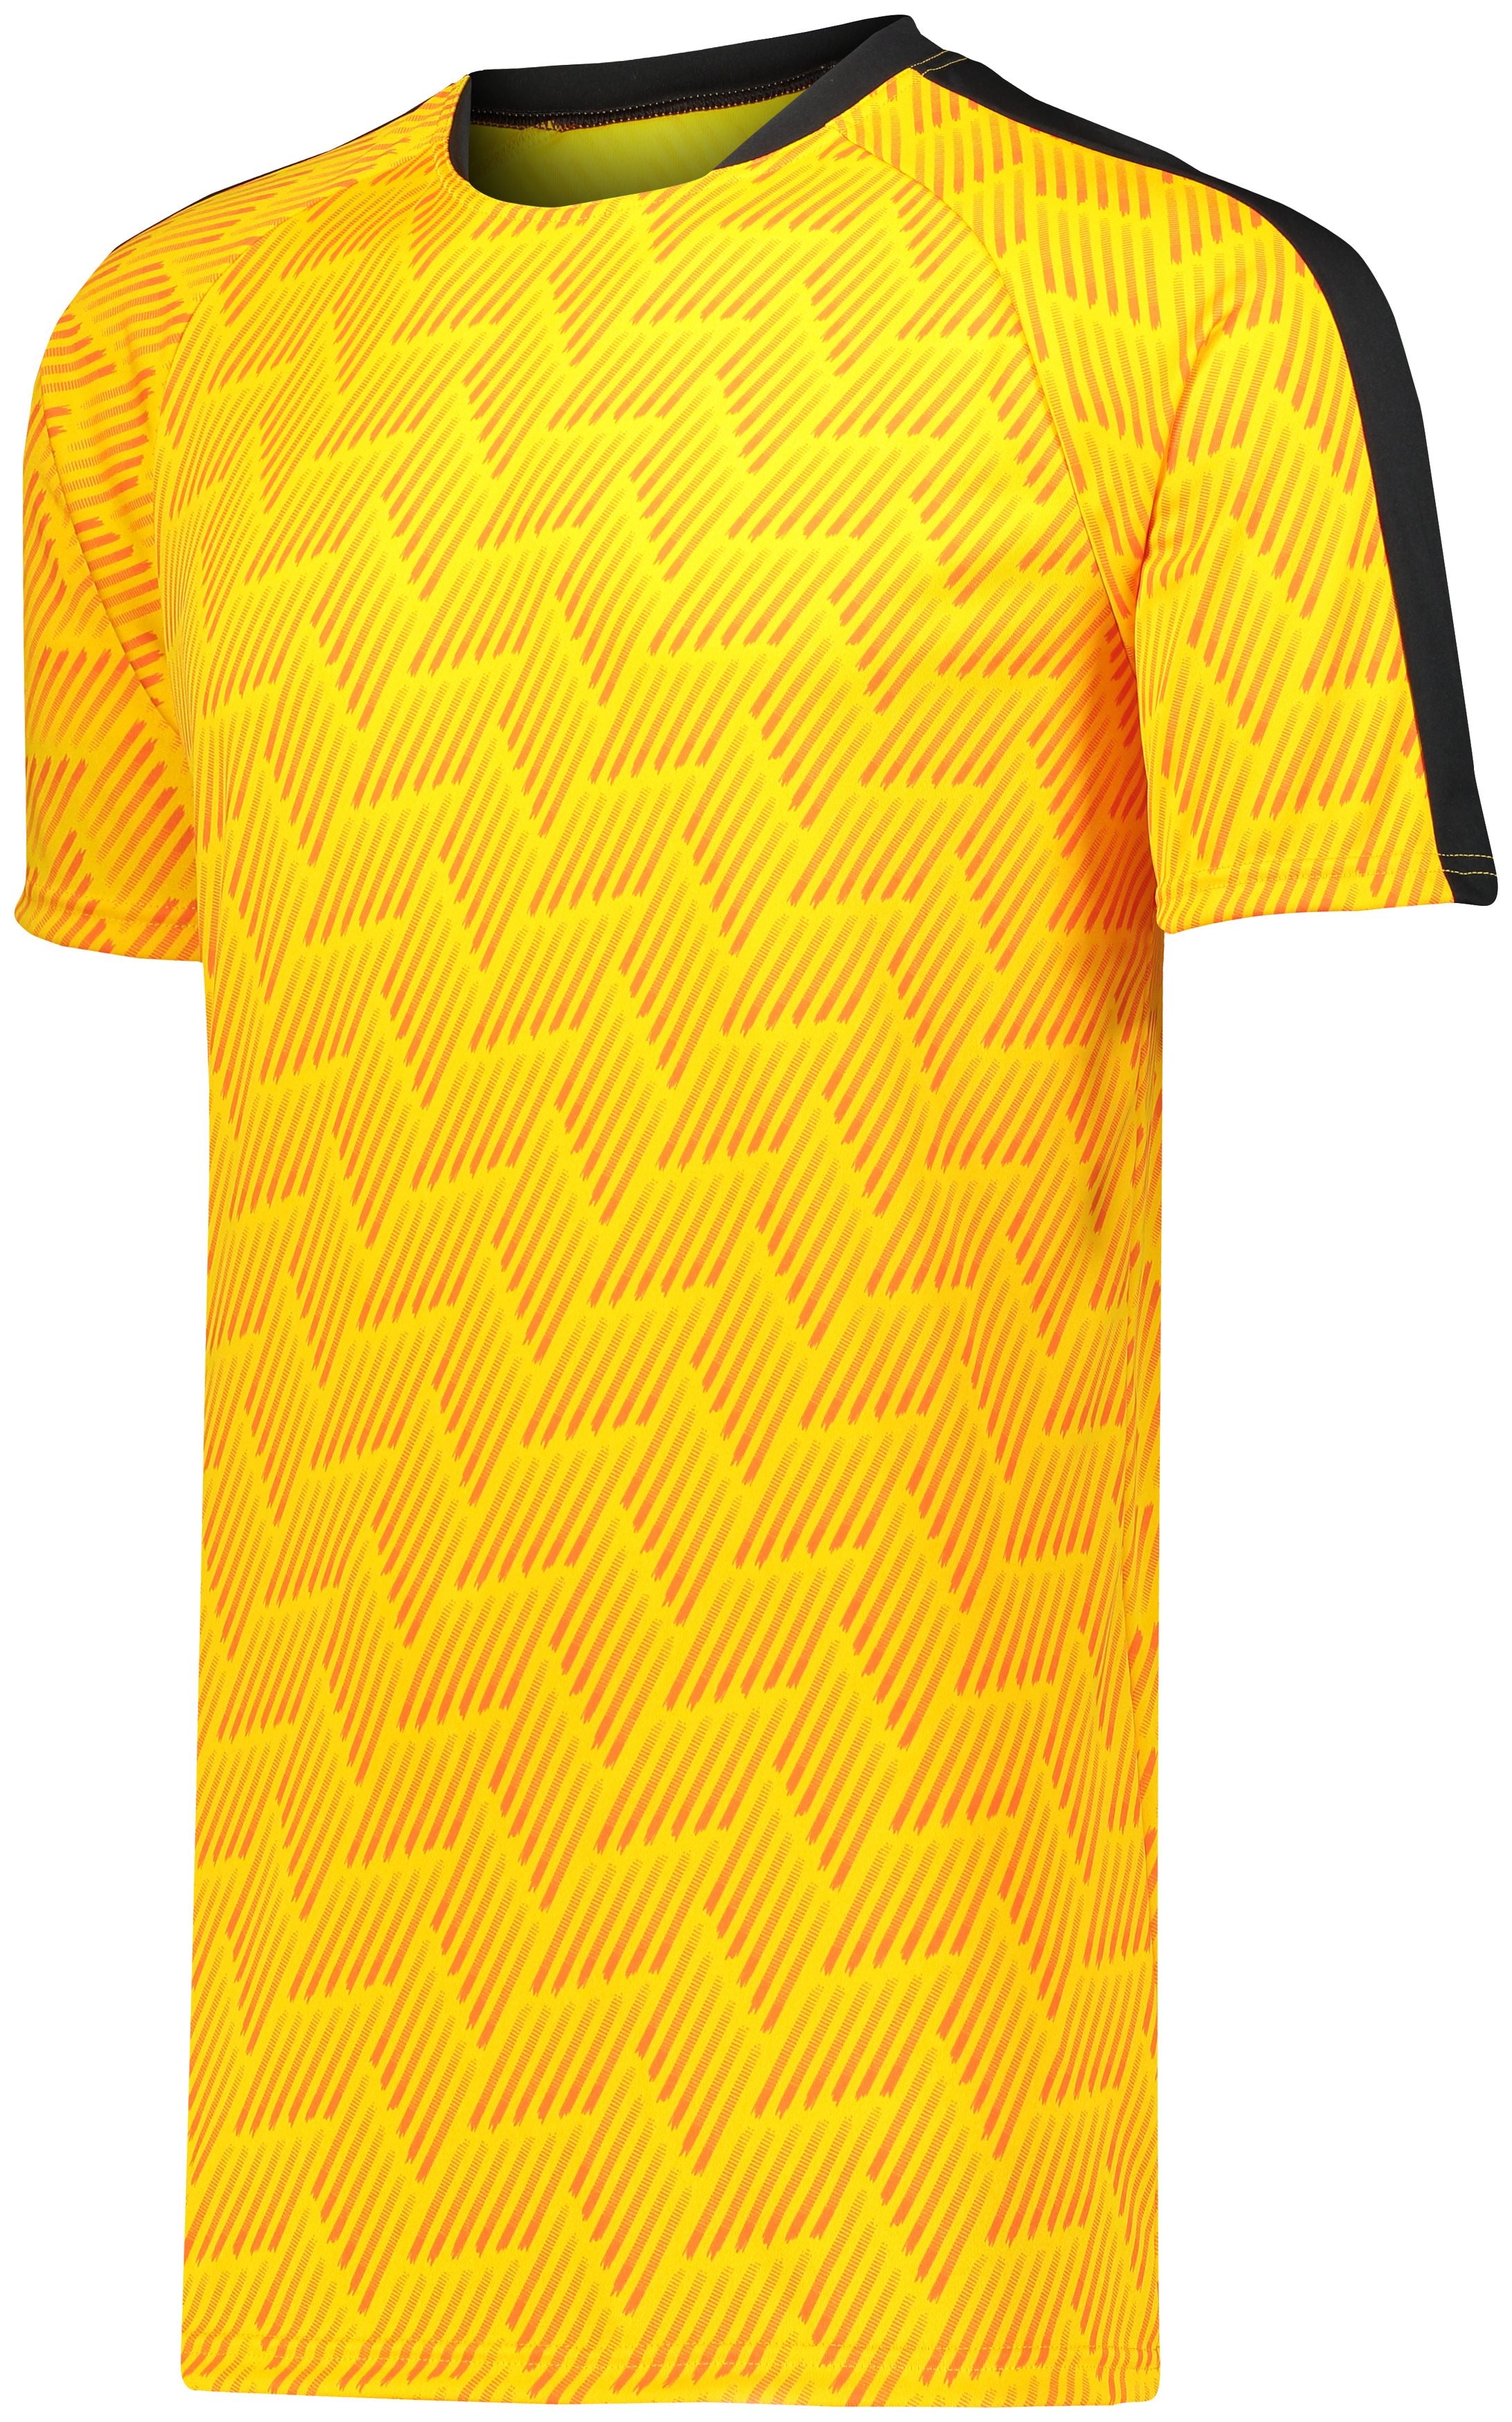 High 5 Hypervolt Jersey in Power Yellow Print/Black  -Part of the Adult, Adult-Jersey, High5-Products, Soccer, Shirts, All-Sports-1 product lines at KanaleyCreations.com